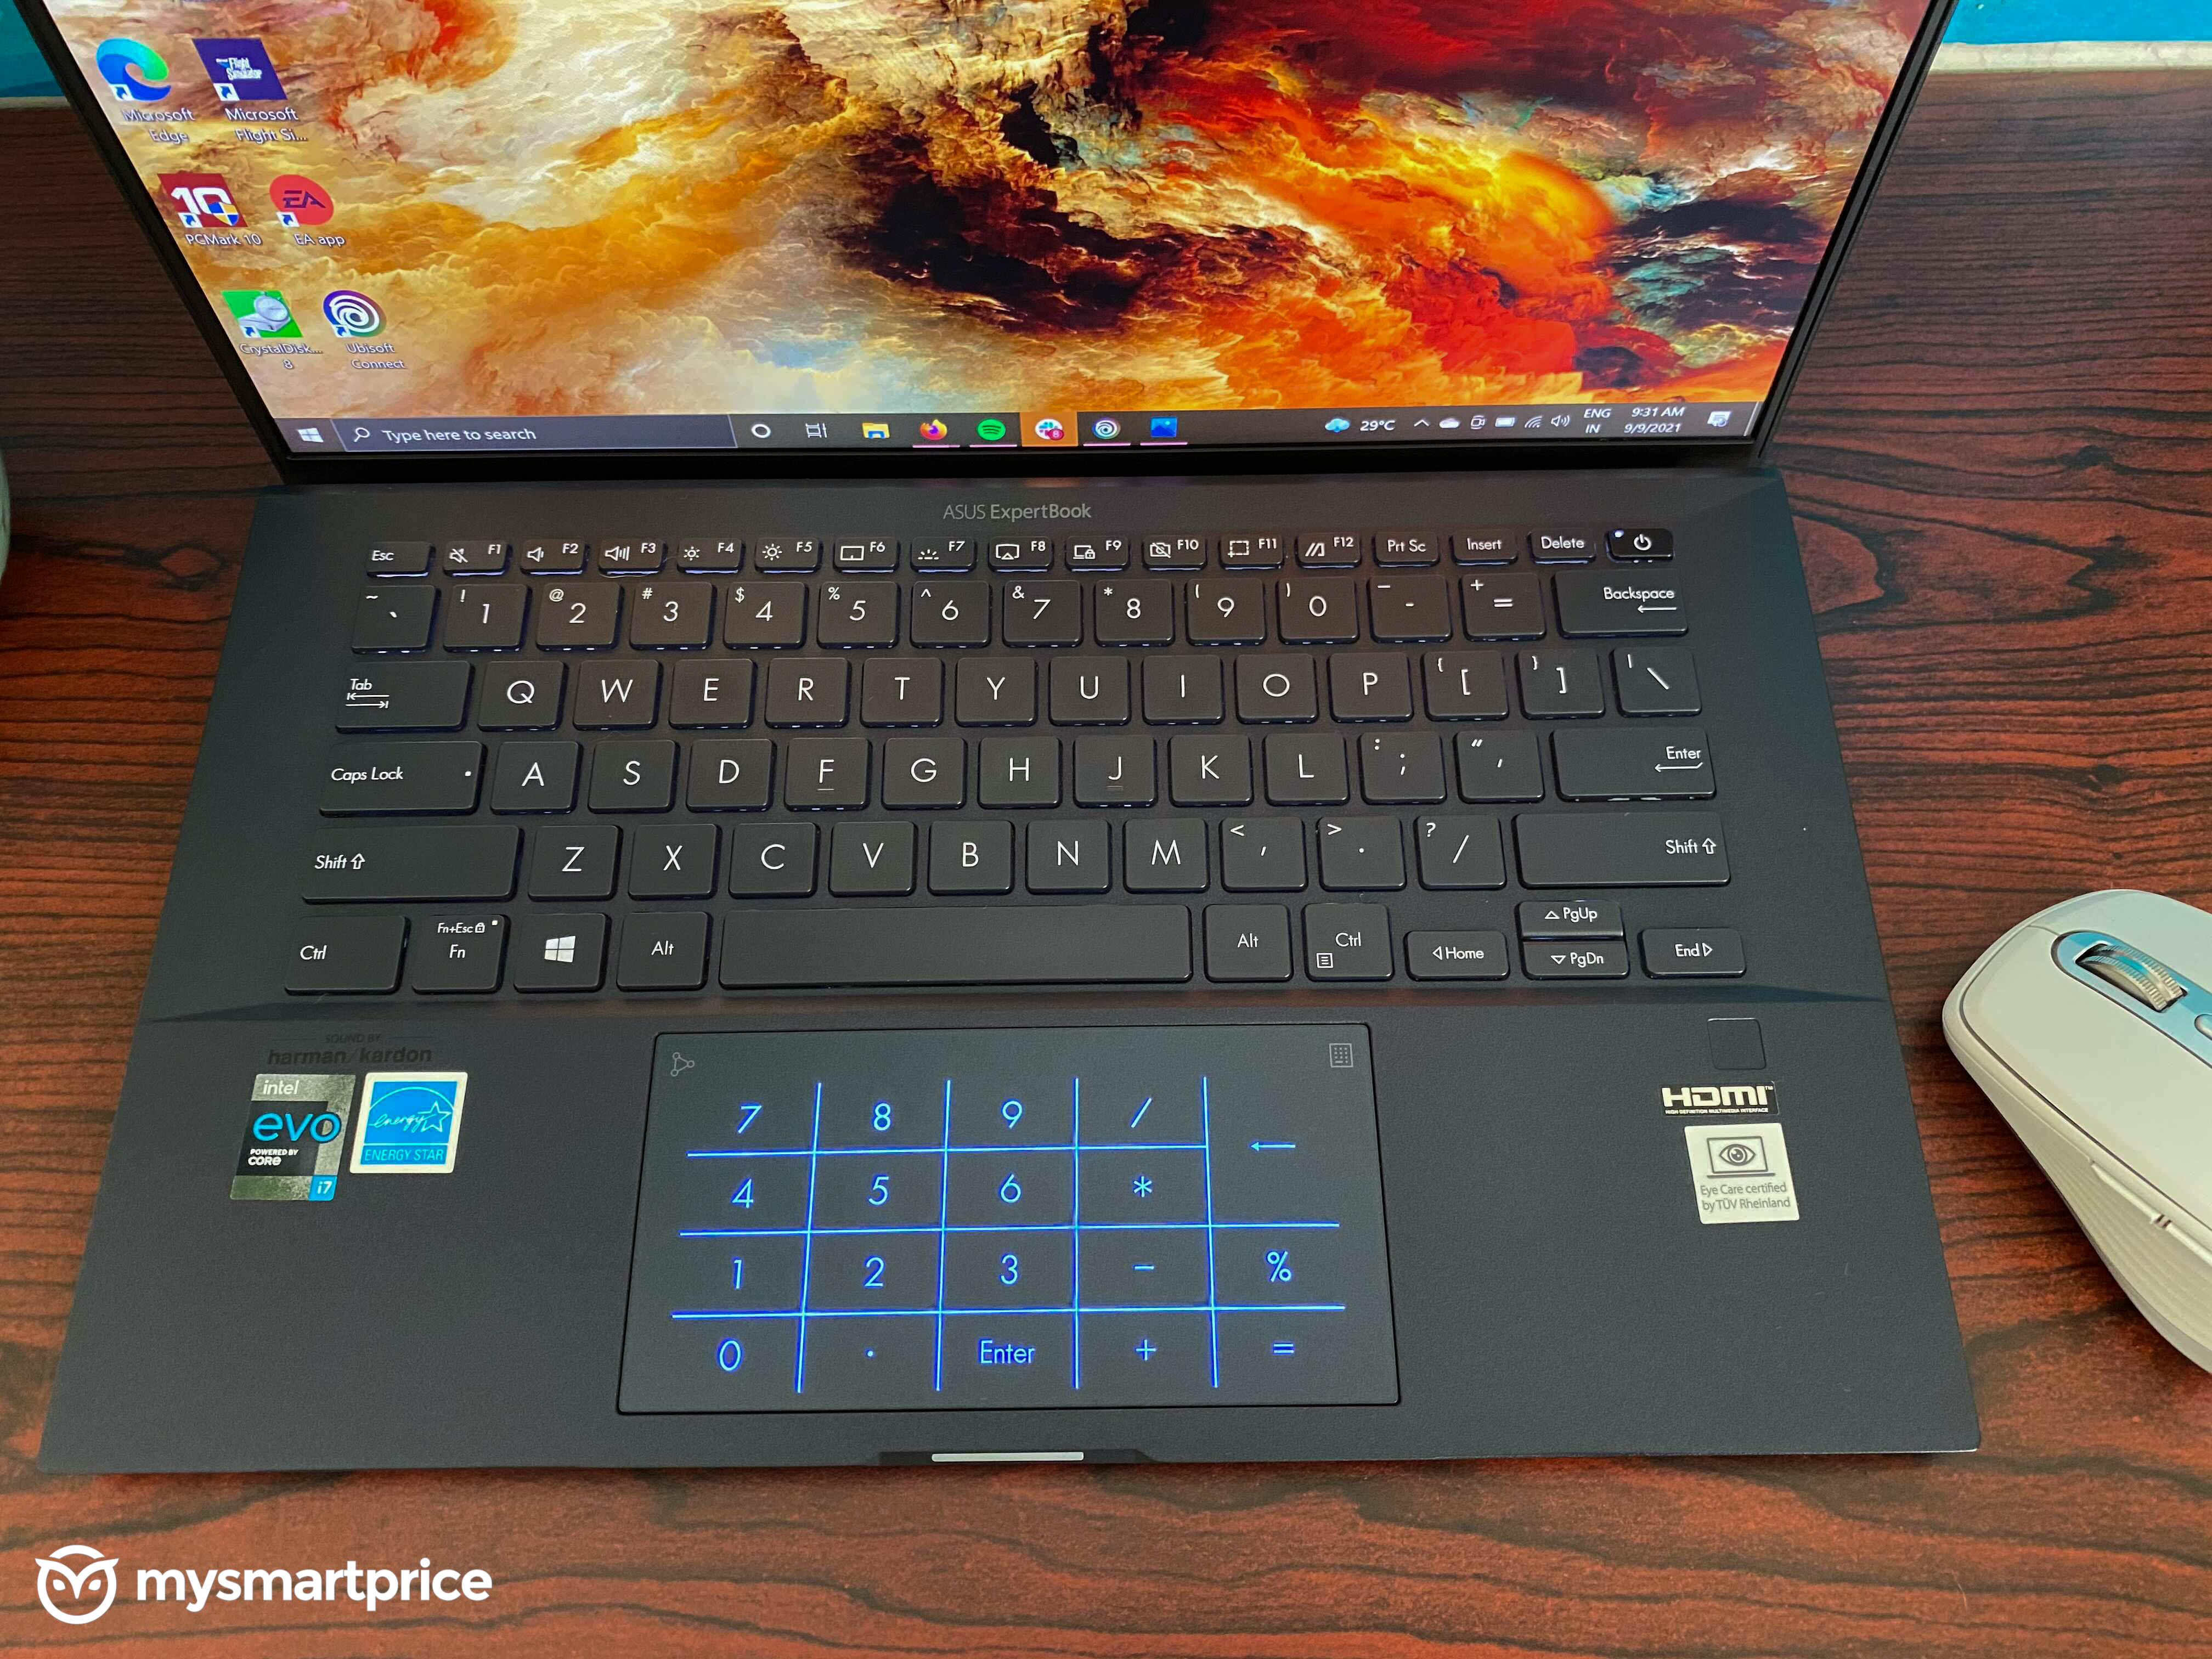 Asus Expertbook B9 Review Putting The Intel Evo Platform To Test